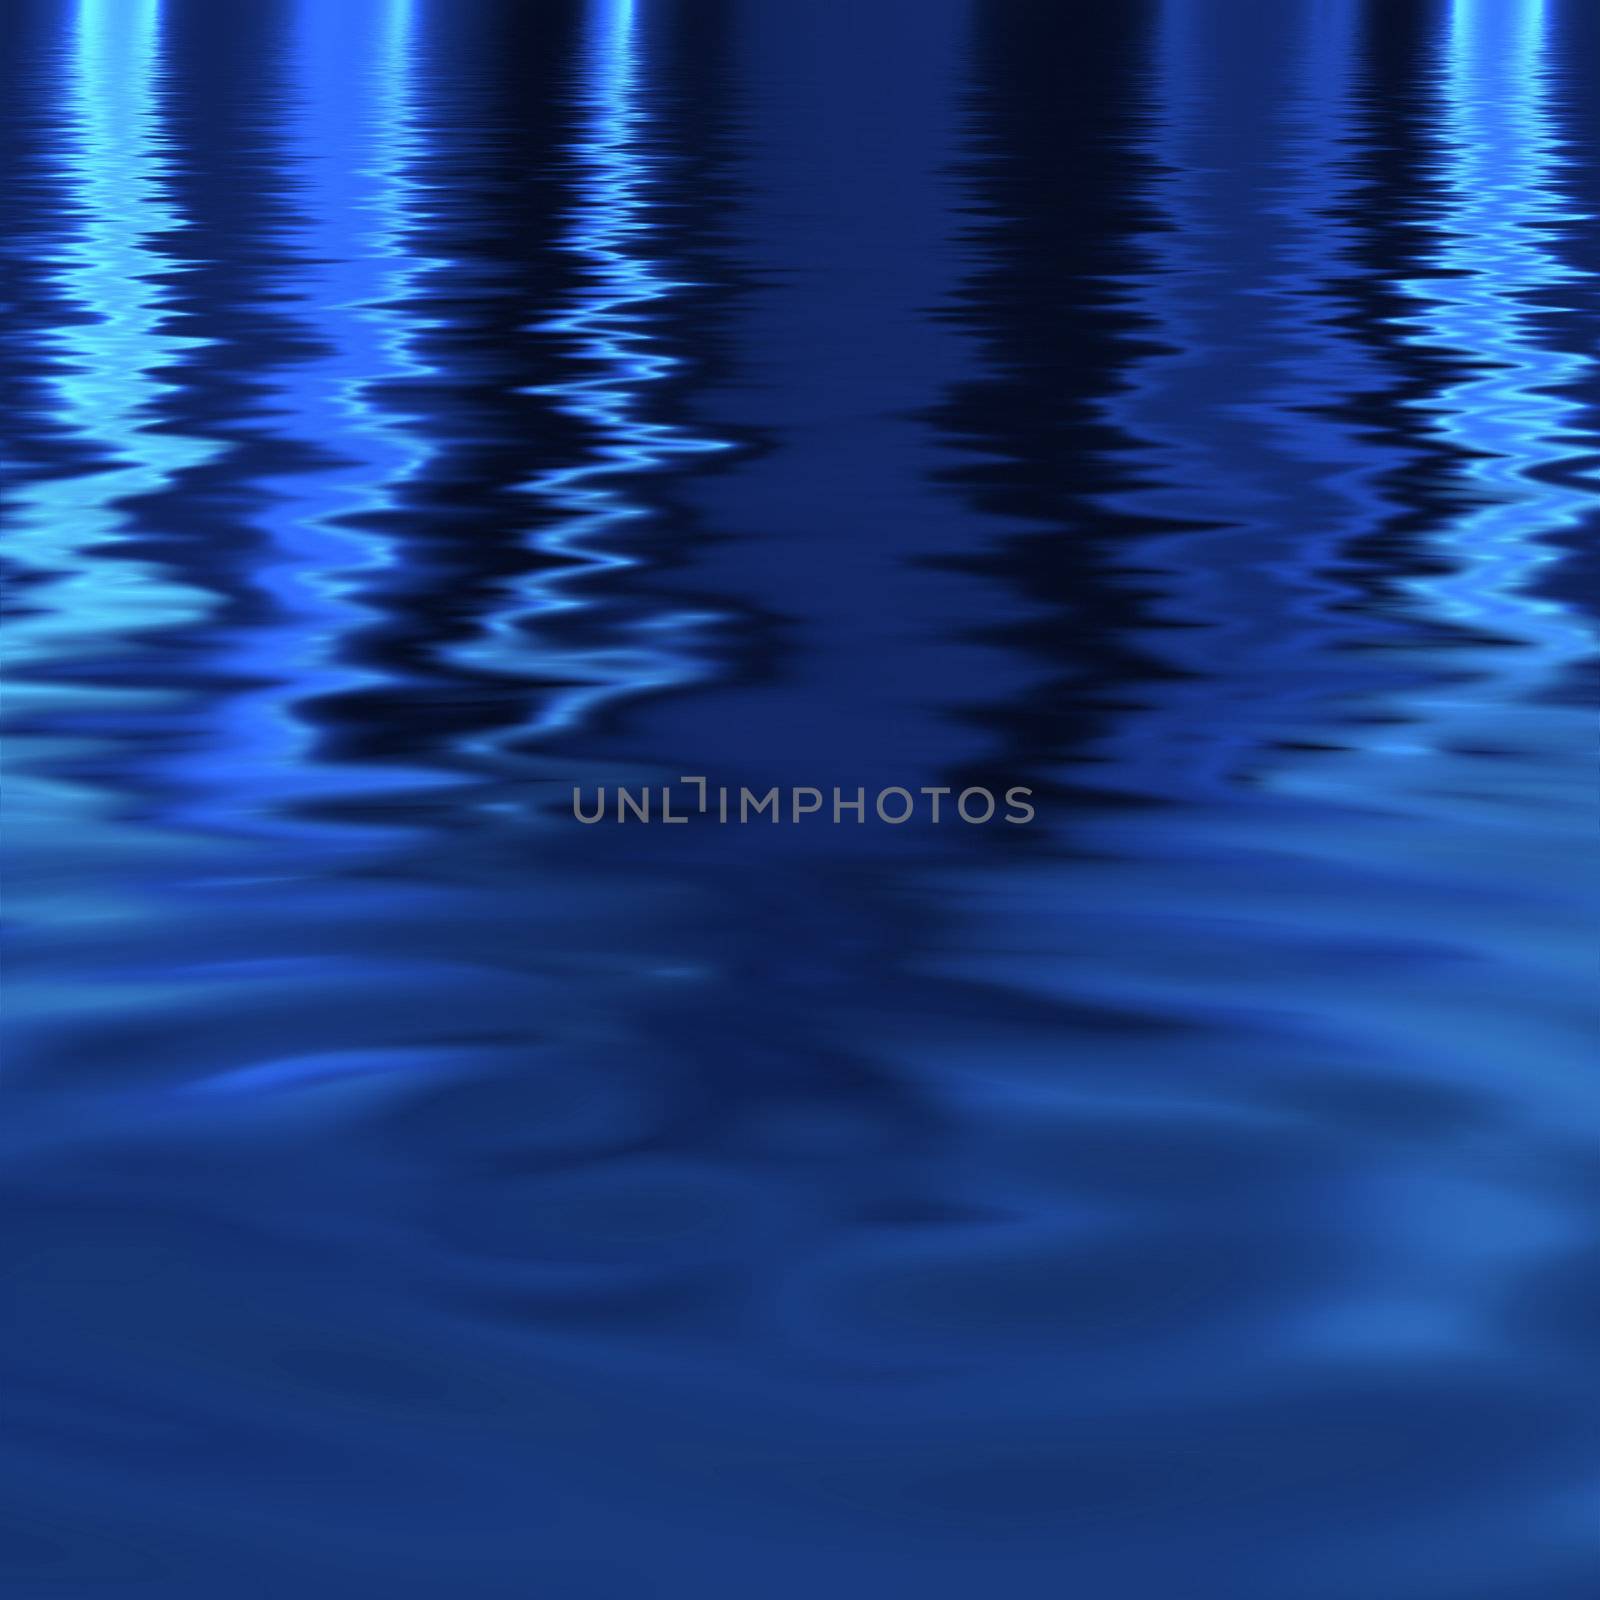 A blue water background illustration with reflections and ripples.